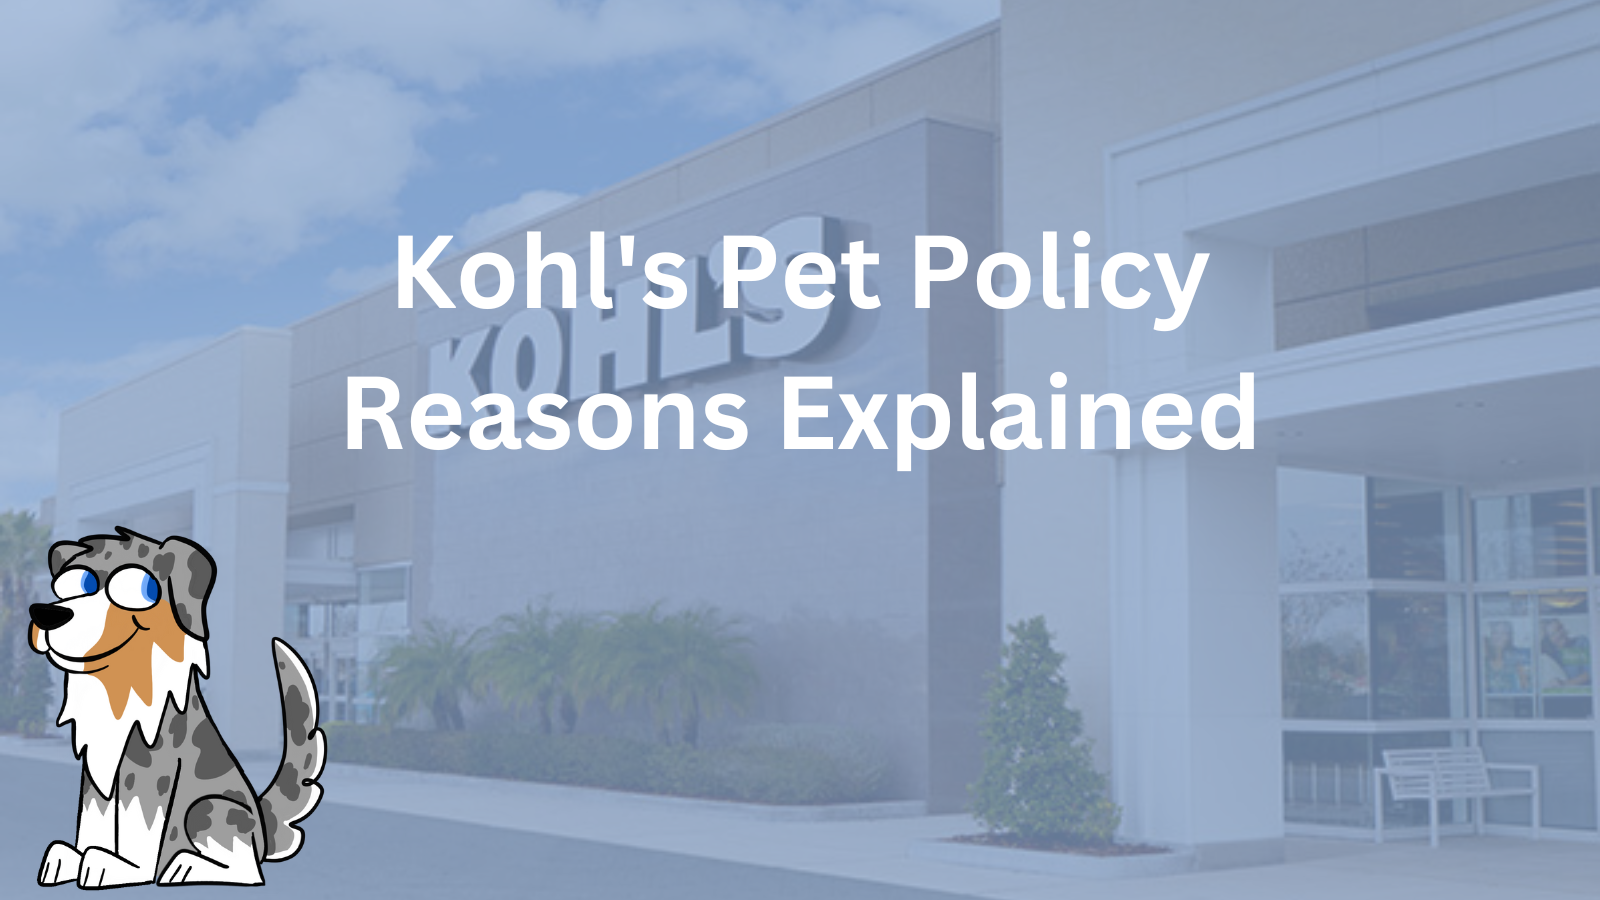 Image Text: "Kohl's Pet Policy Reasons Explained"